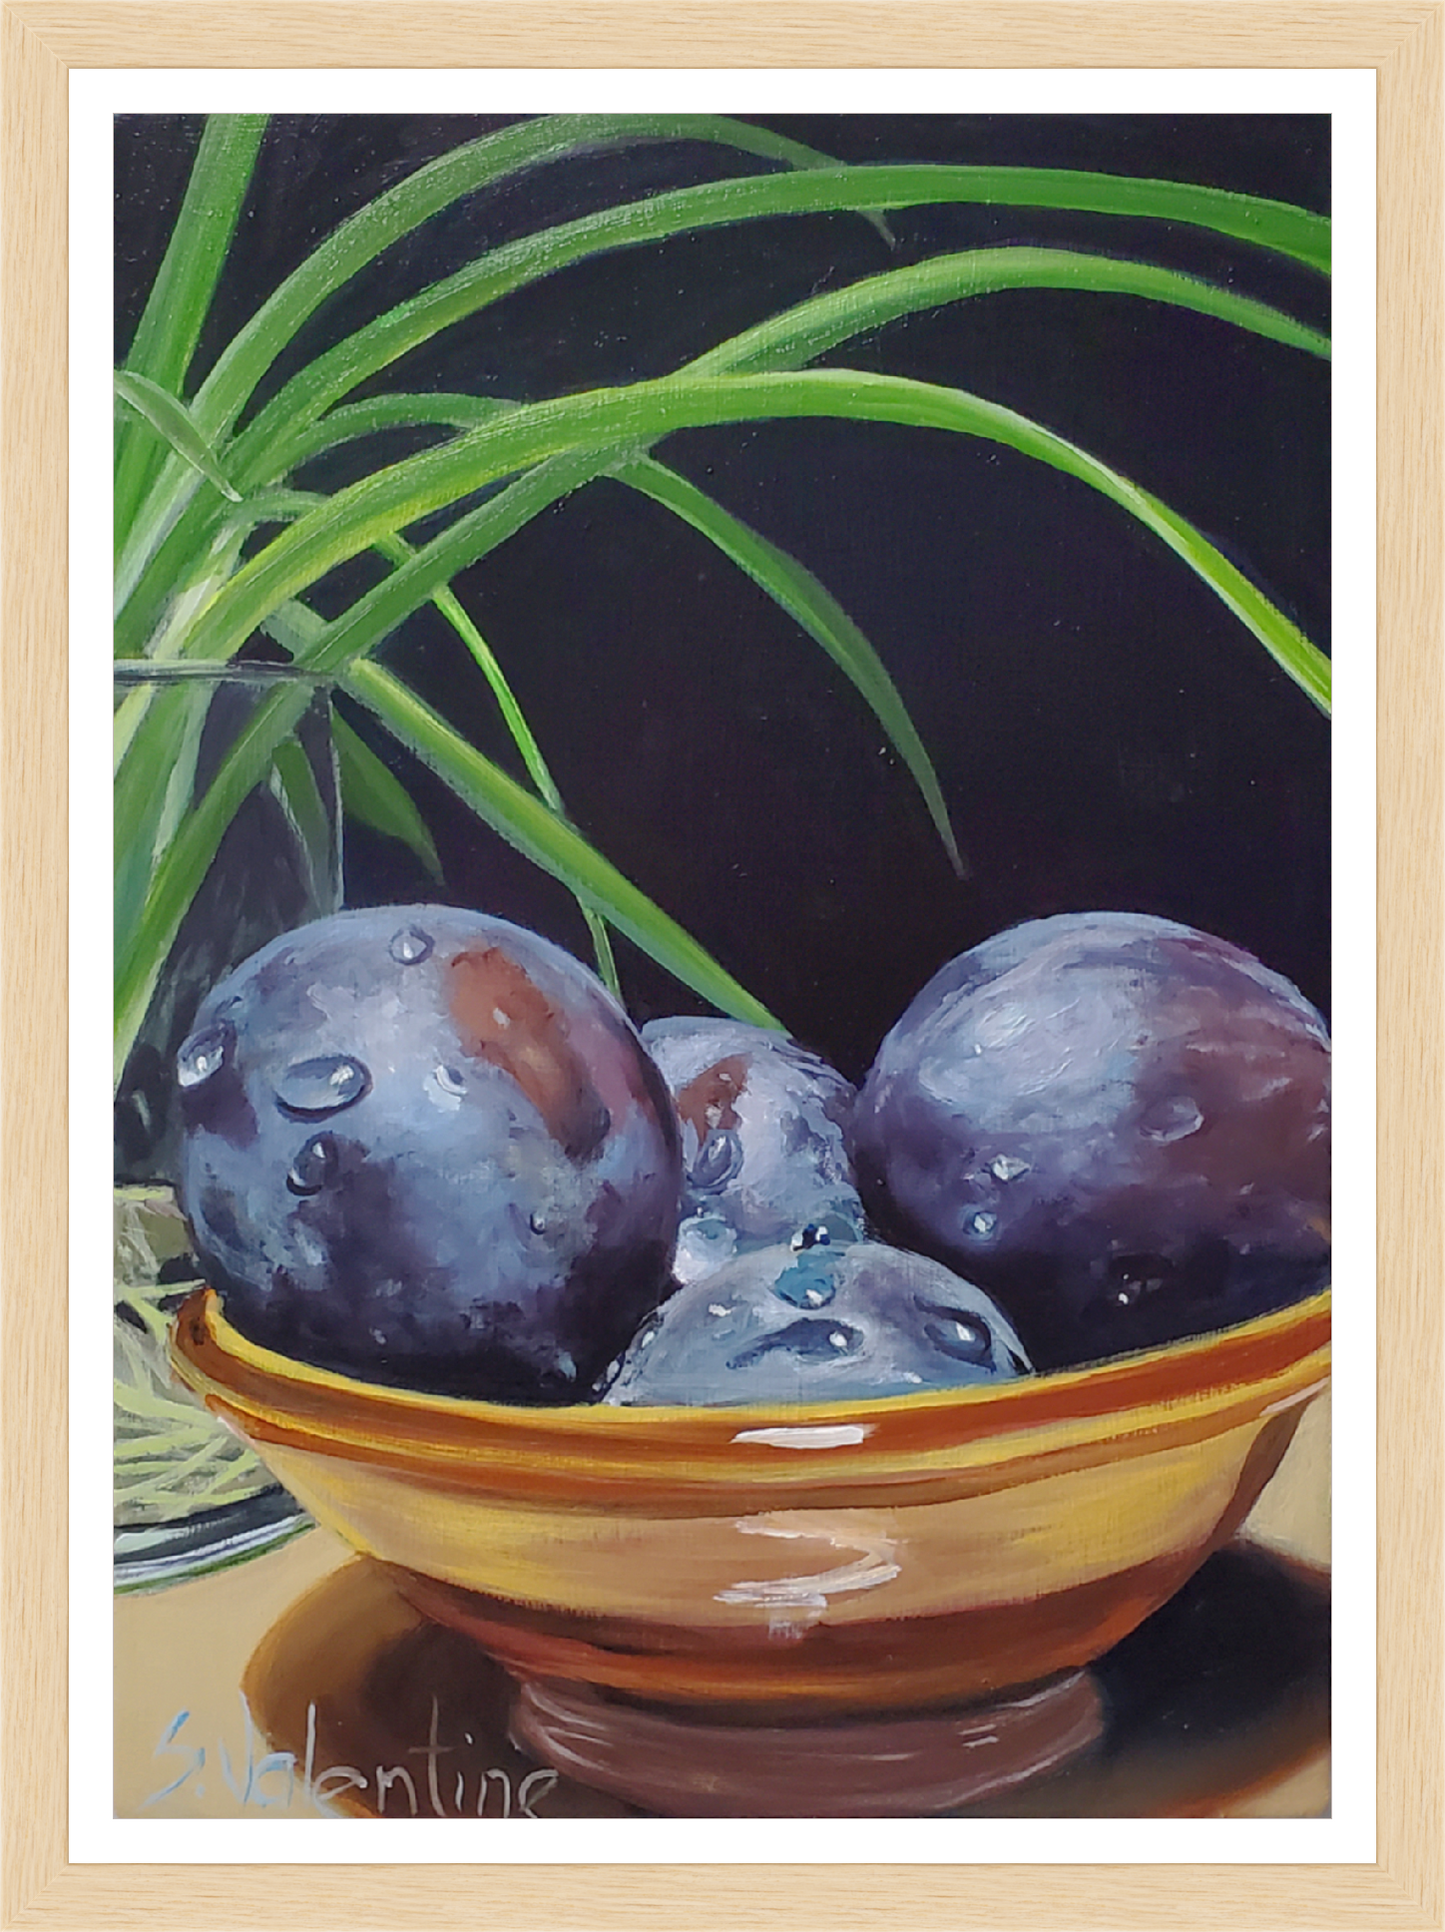 Load image into Gallery viewer, Plum II – print by Susan Valentine
